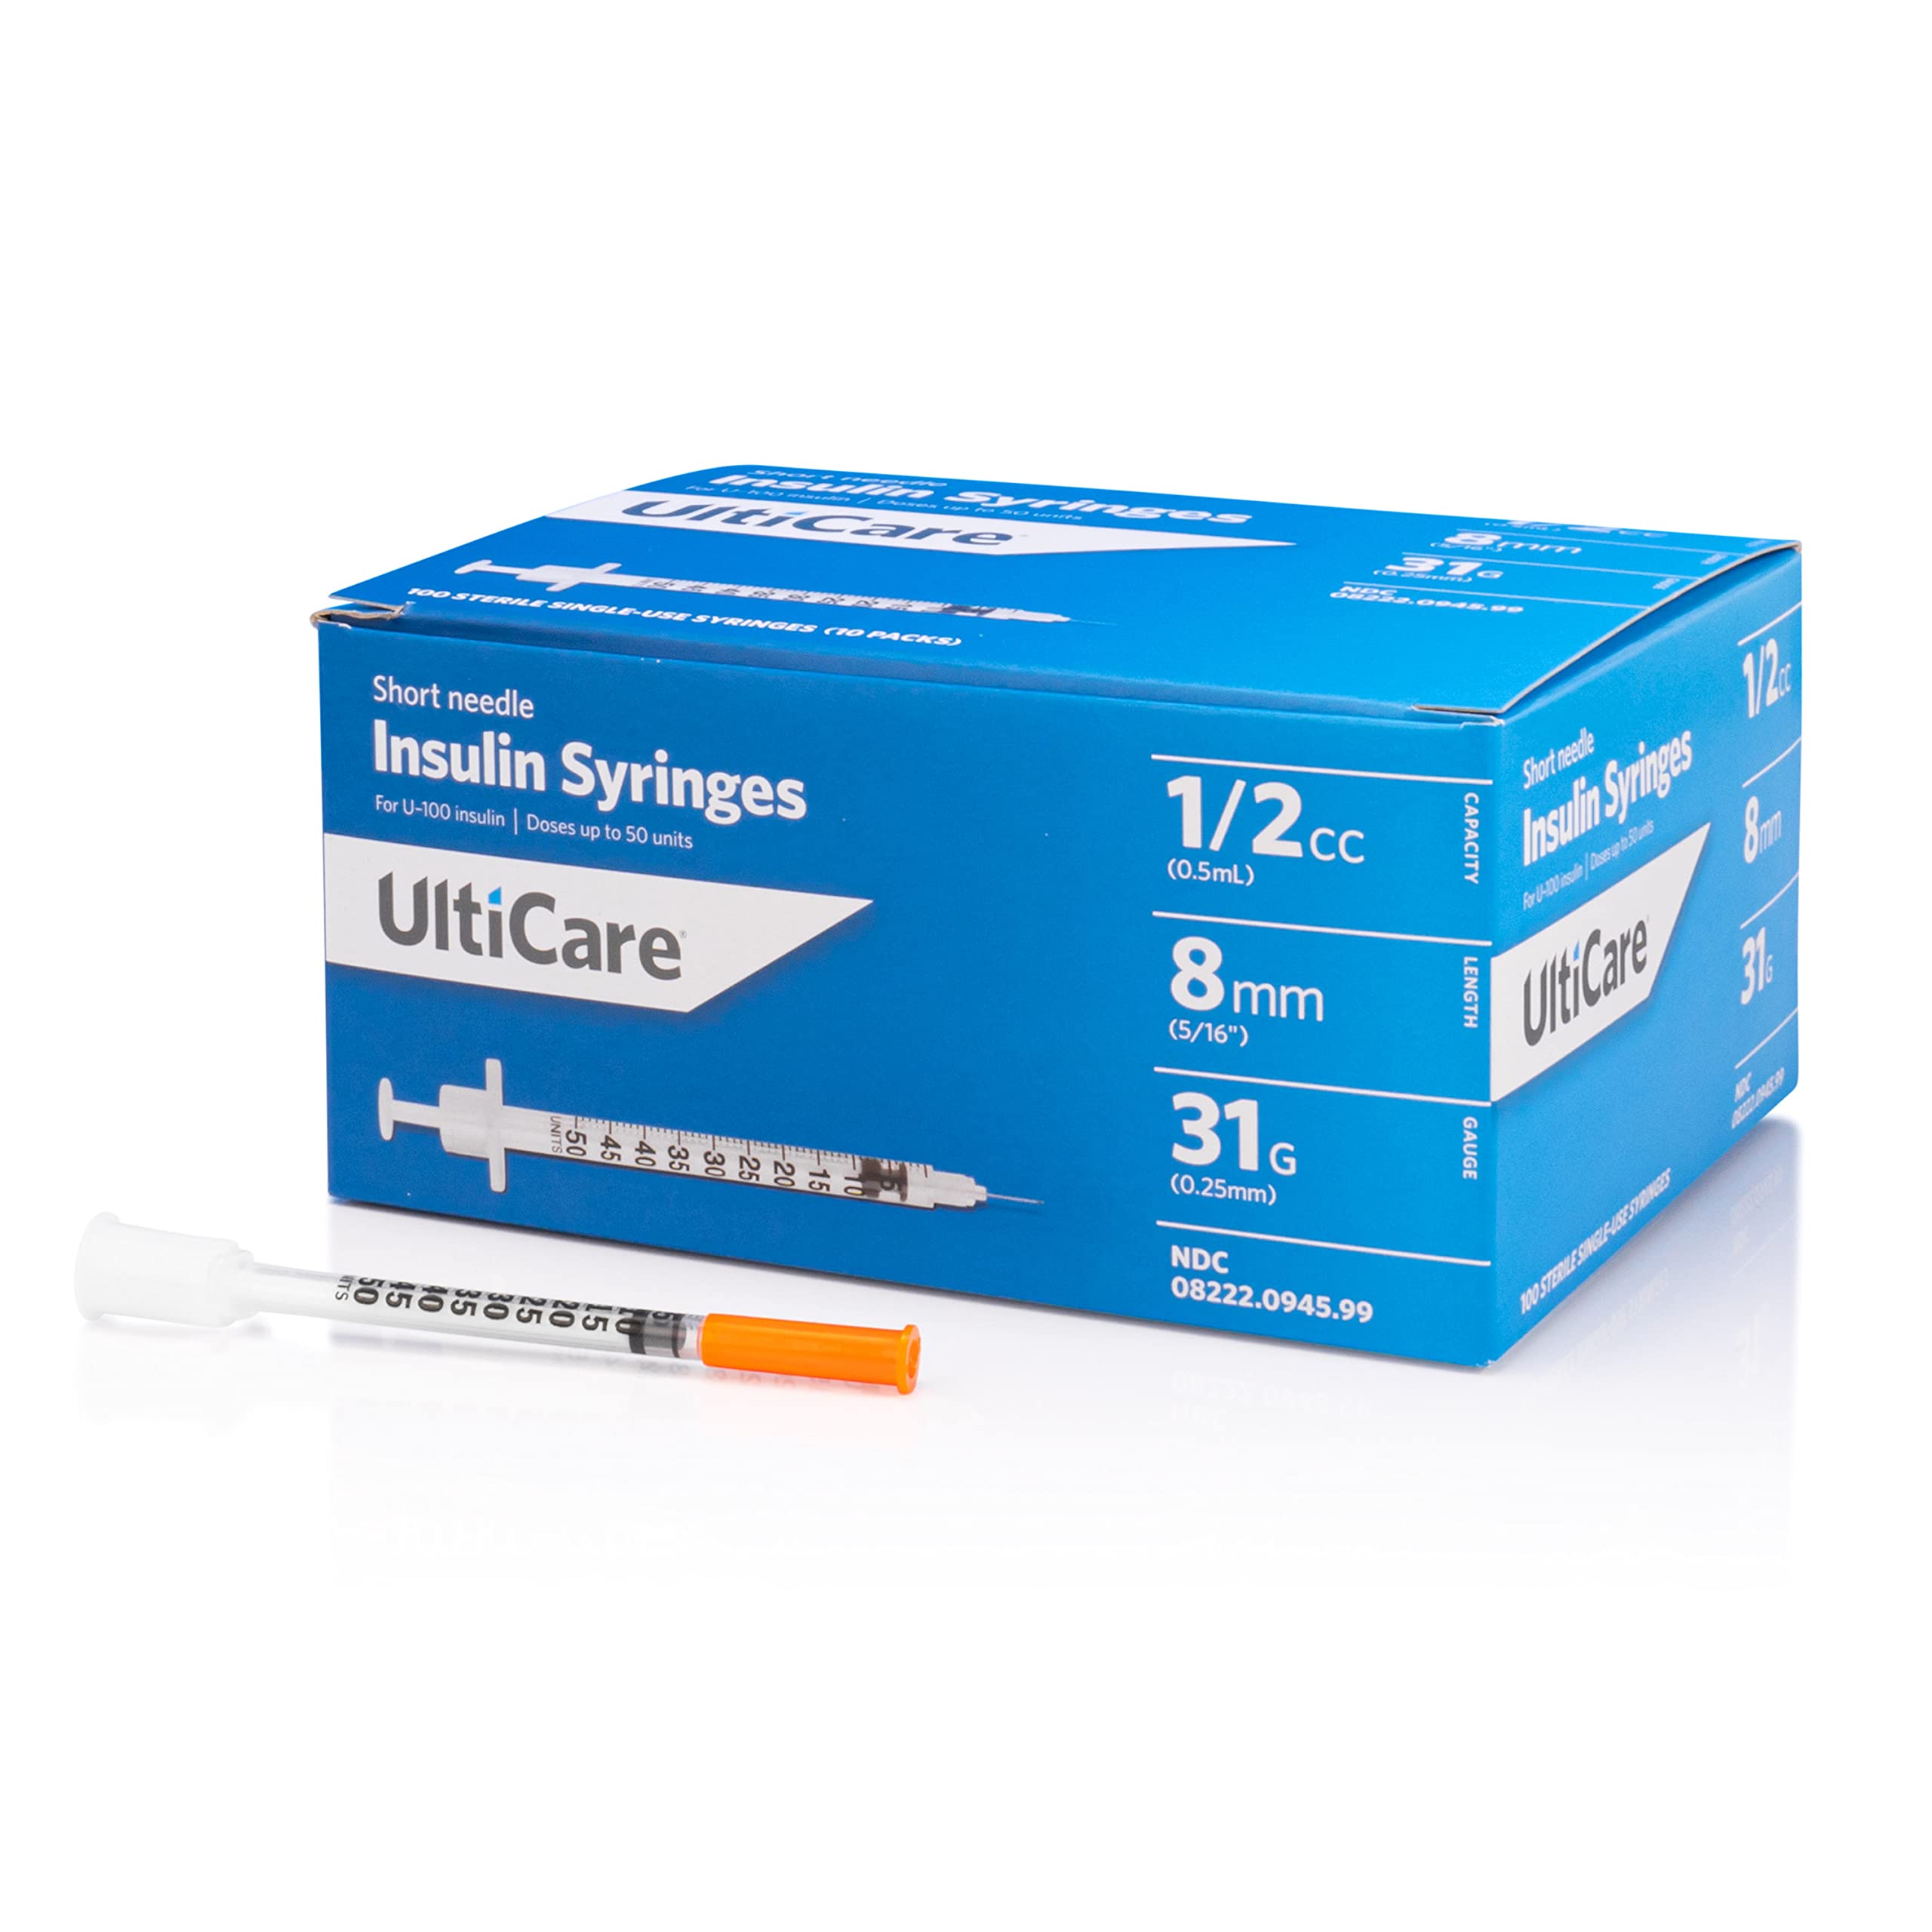 UltiCare Insulin Syringes 1/2 mL - 31G x 8mm 100 Count Box